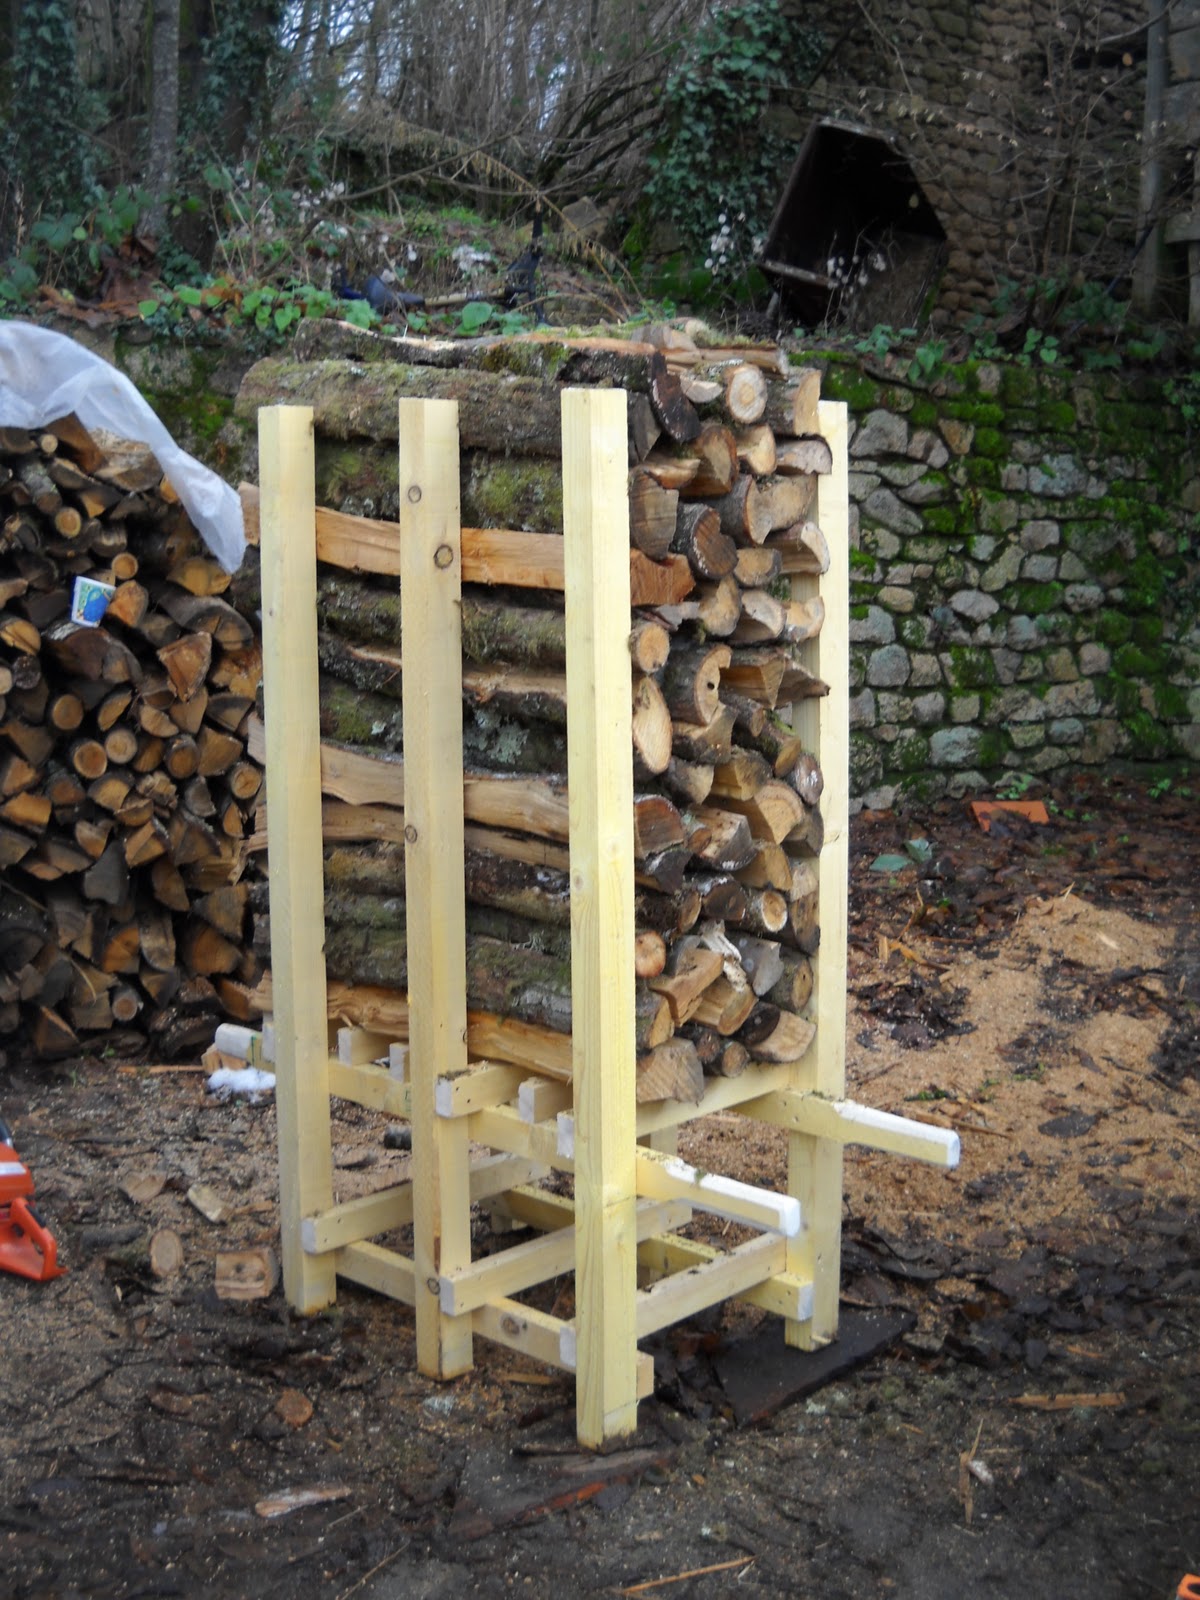 The logs are packed as solidly as possible into the frame which